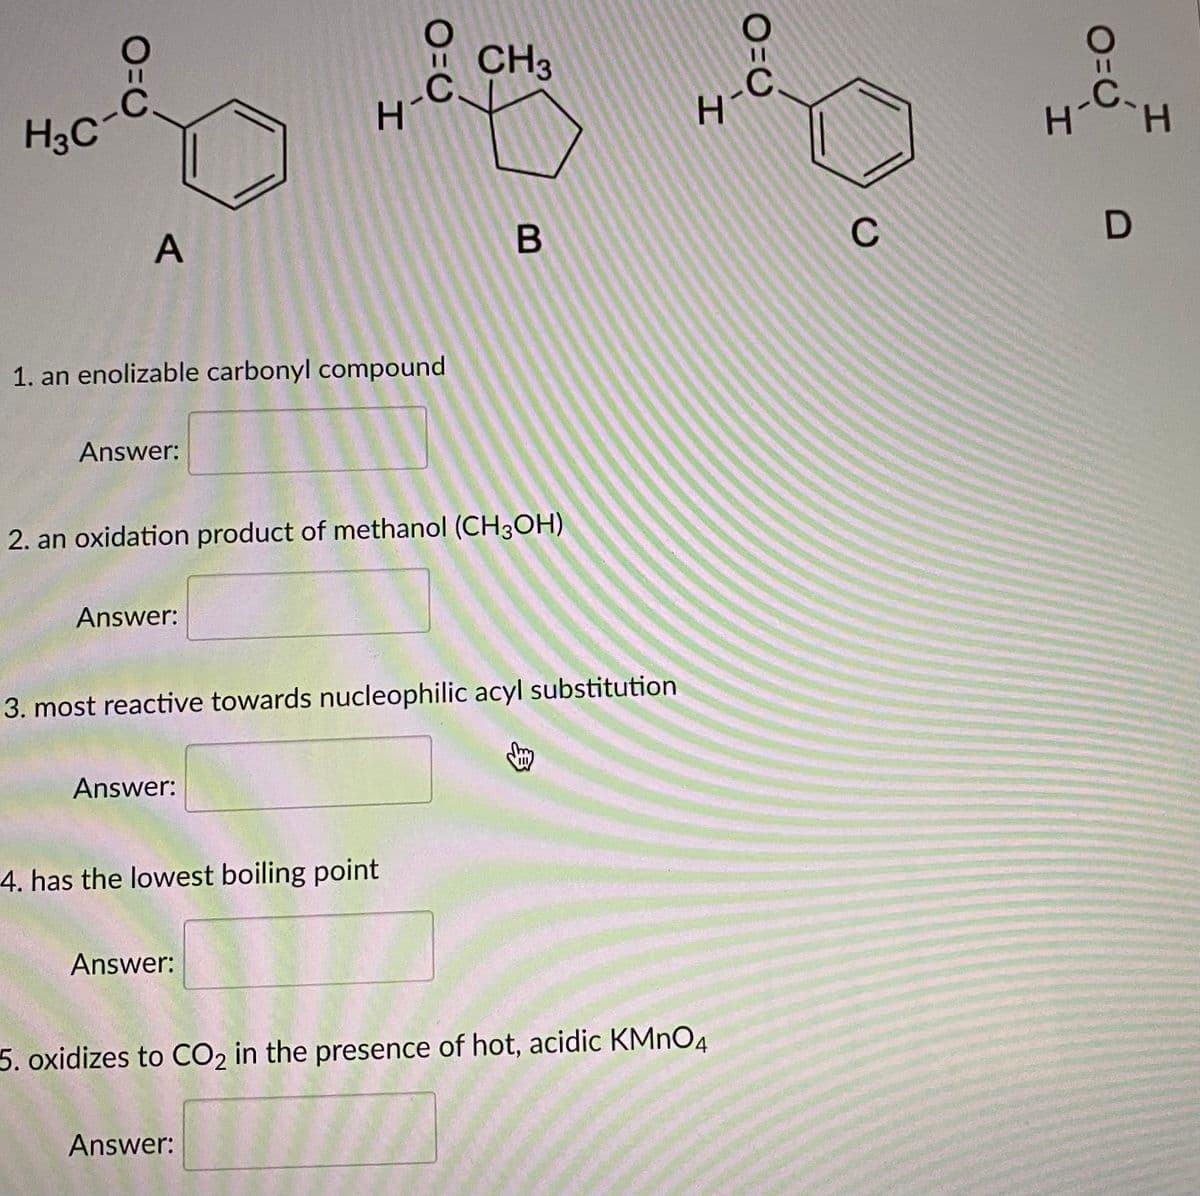 CH3
.C.
H.
.C.
H3C
H.
A
C
1. an enolizable carbonyl compound
Answer:
2. an oxidation product of methanol (CH3OH)
Answer:
3. most reactive towards nucleophilic acyl substitution
Answer:
4. has the lowest boiling point
Answer:
5. oxidizes to CO2 in the presence of hot, acidic KMNO4
Answer:
O=U
